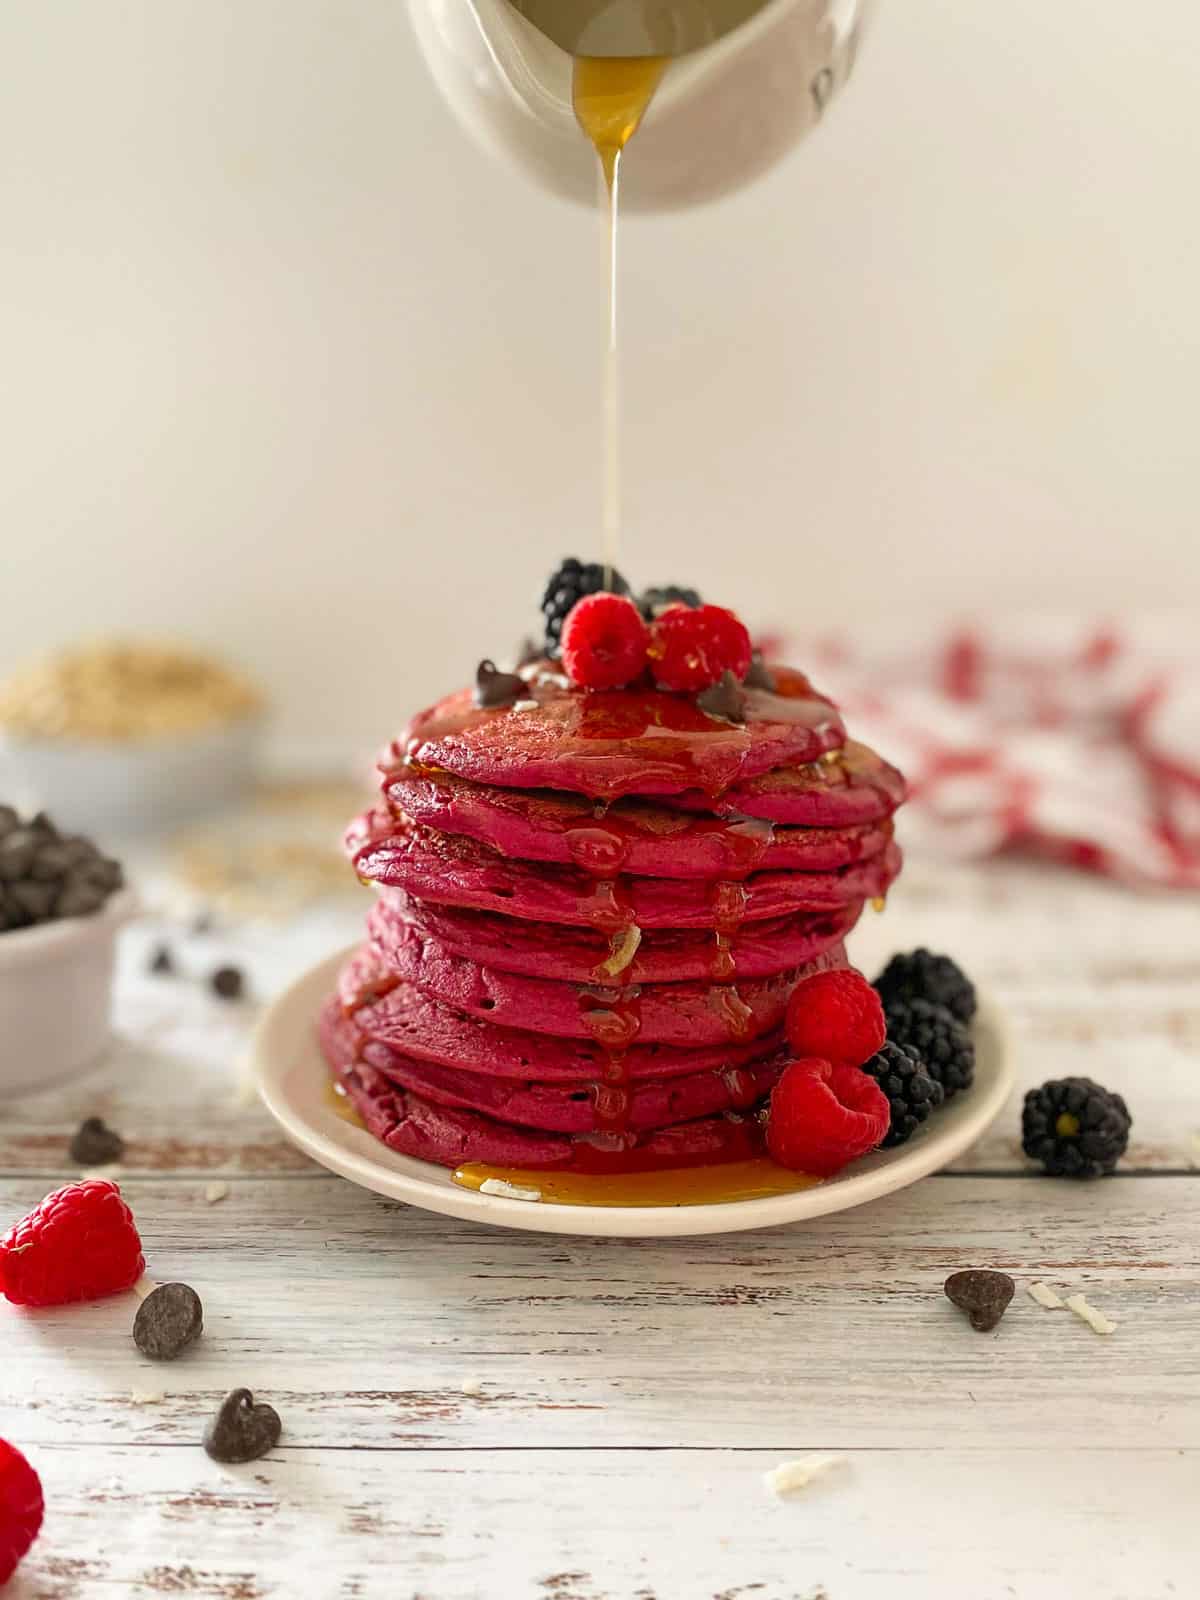 Syrup pouring over stack of pink pancakes with berries on top.